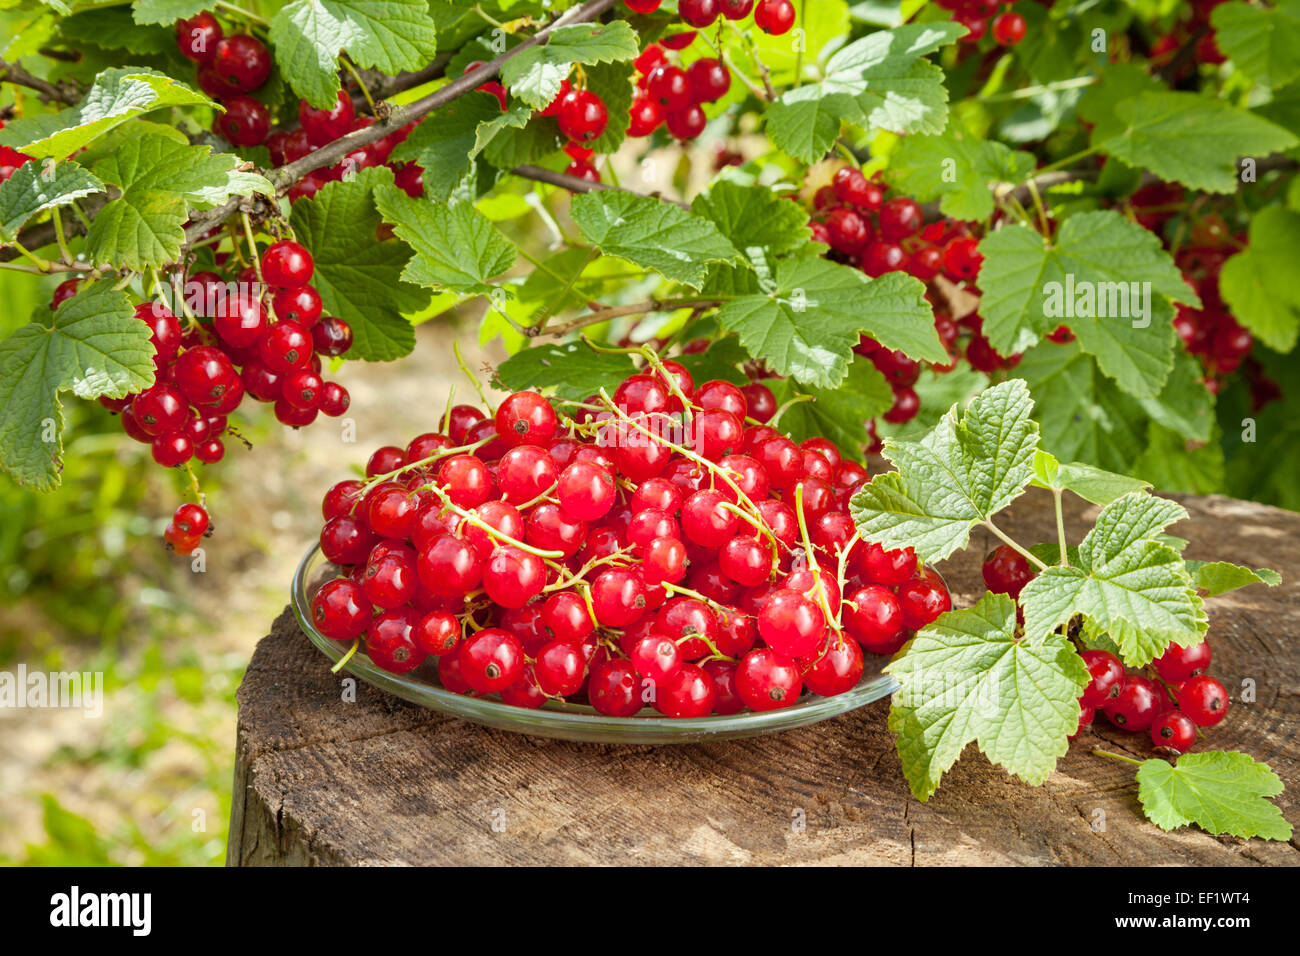 red currants on plate and bunch with berries in garden Stock Photo